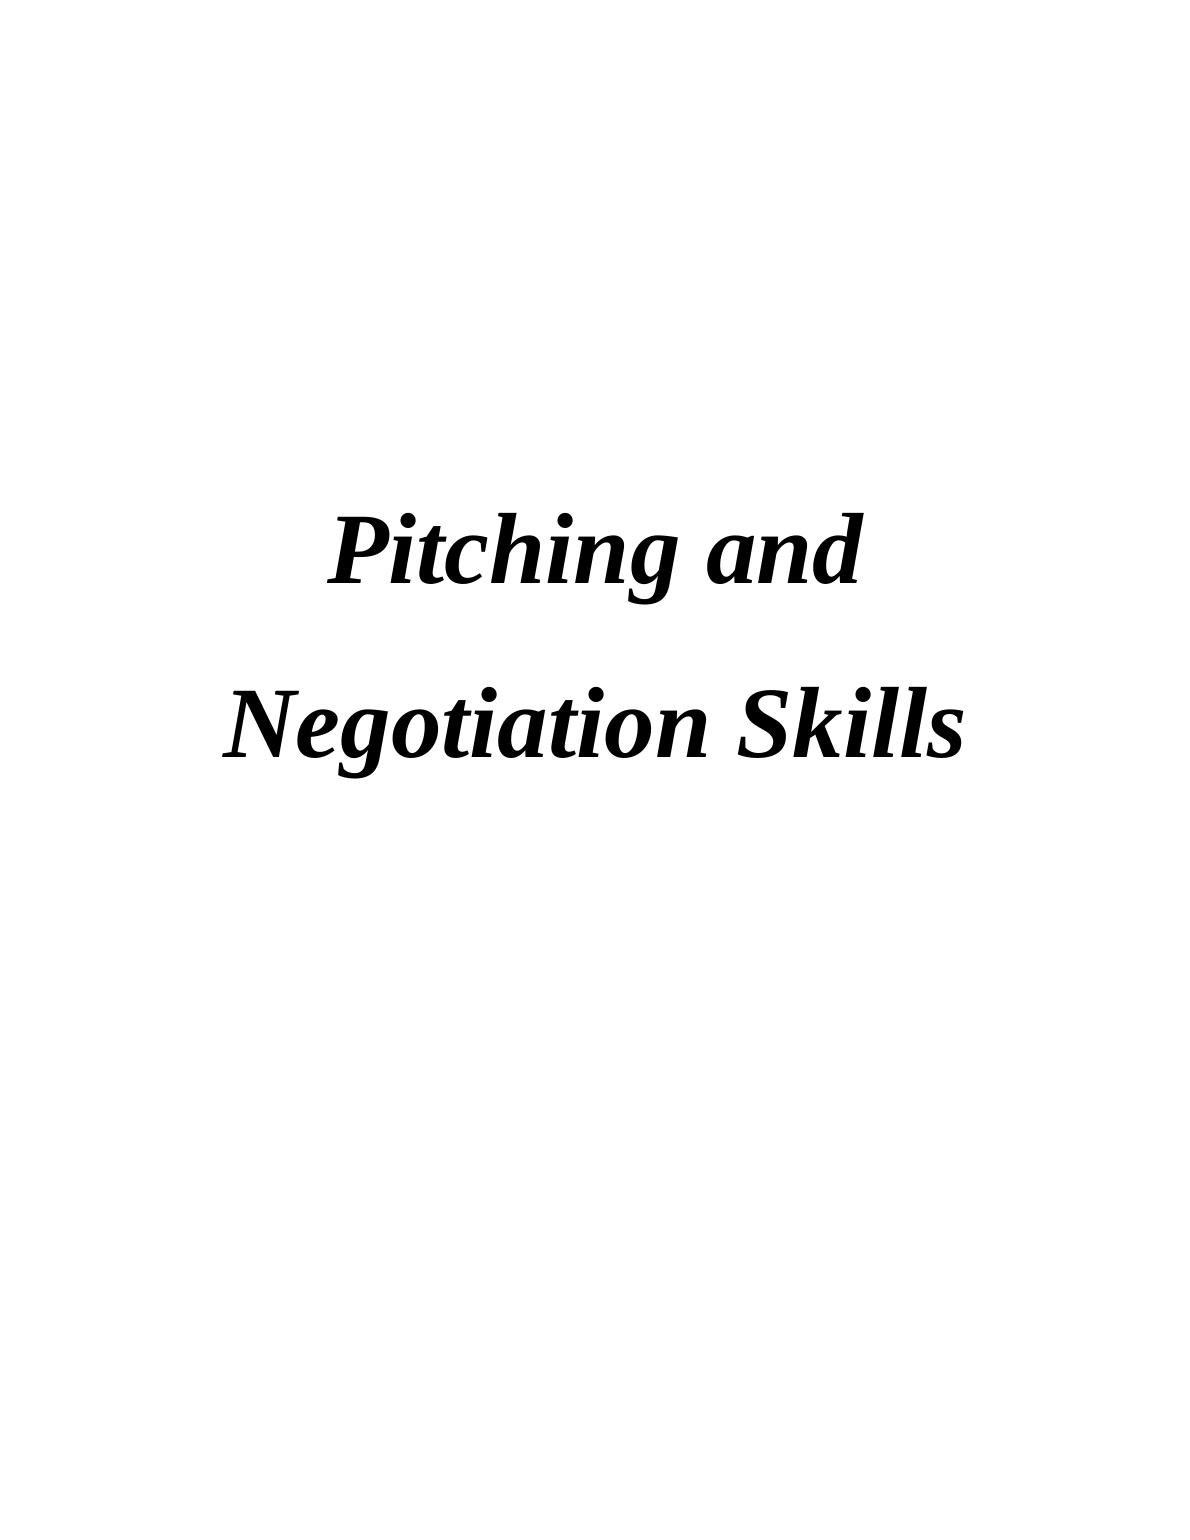 Report on Stakeholder's Pitching and Negotiation Skills_1